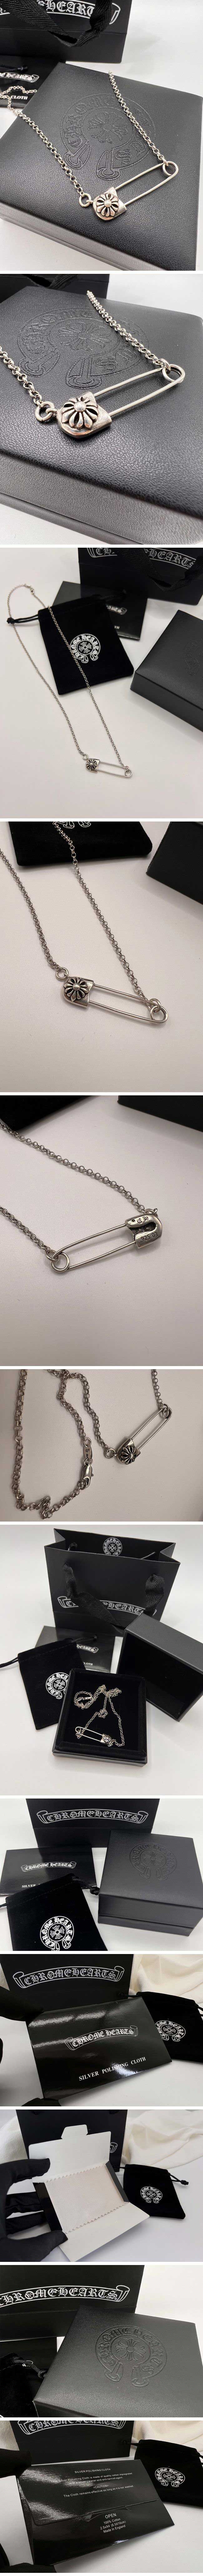 Chrome Hearts SV925 CH Plus Safety Pin Roll Chain Necklace クロムハーツ CHプラス セーフティピン ロールチェーン ネックレス